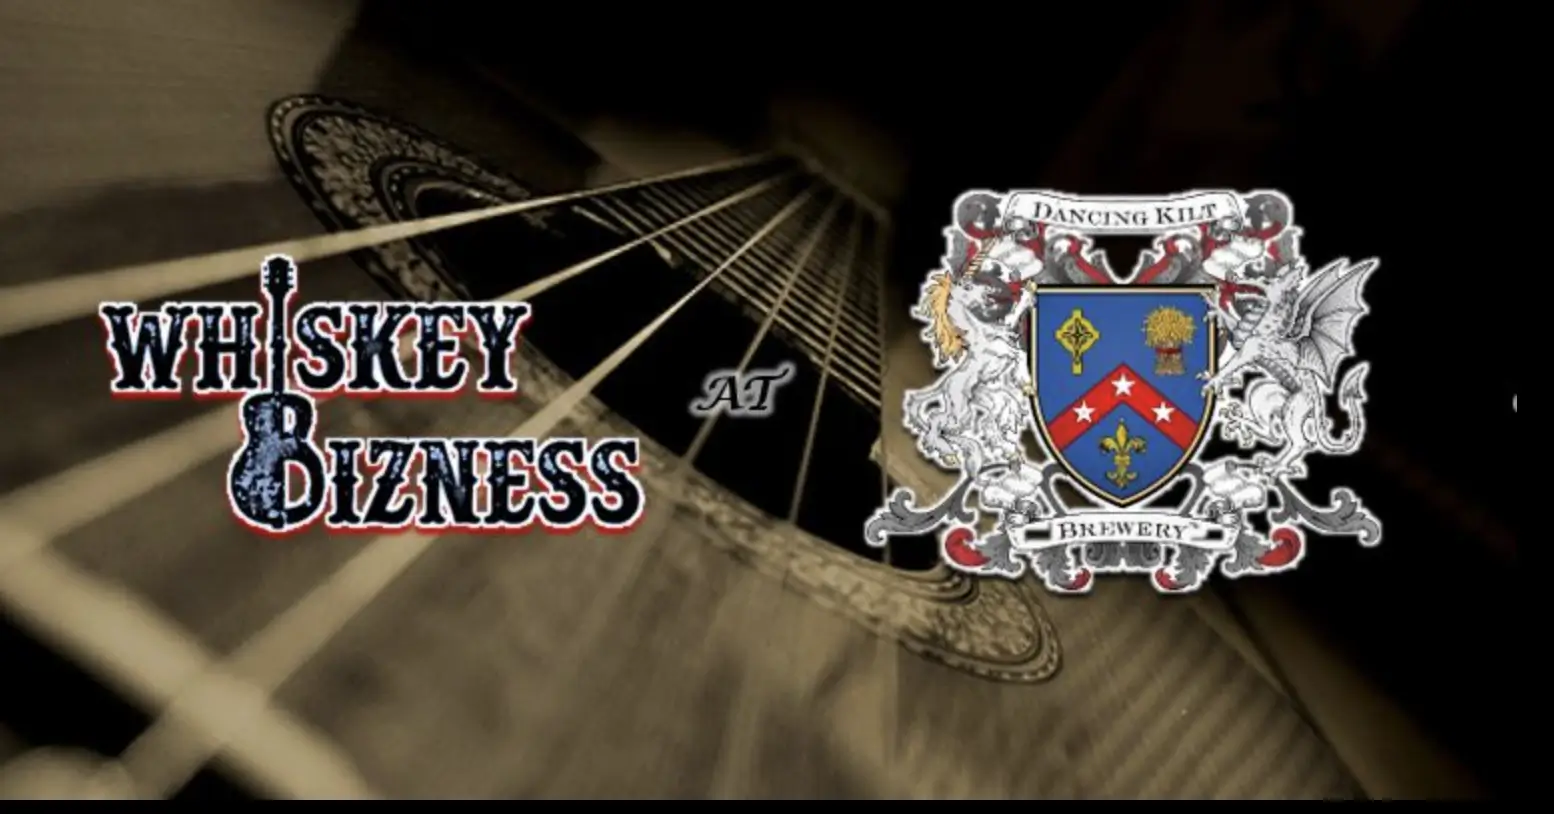 The logo for whiskey bliss with an acoustic guitar.